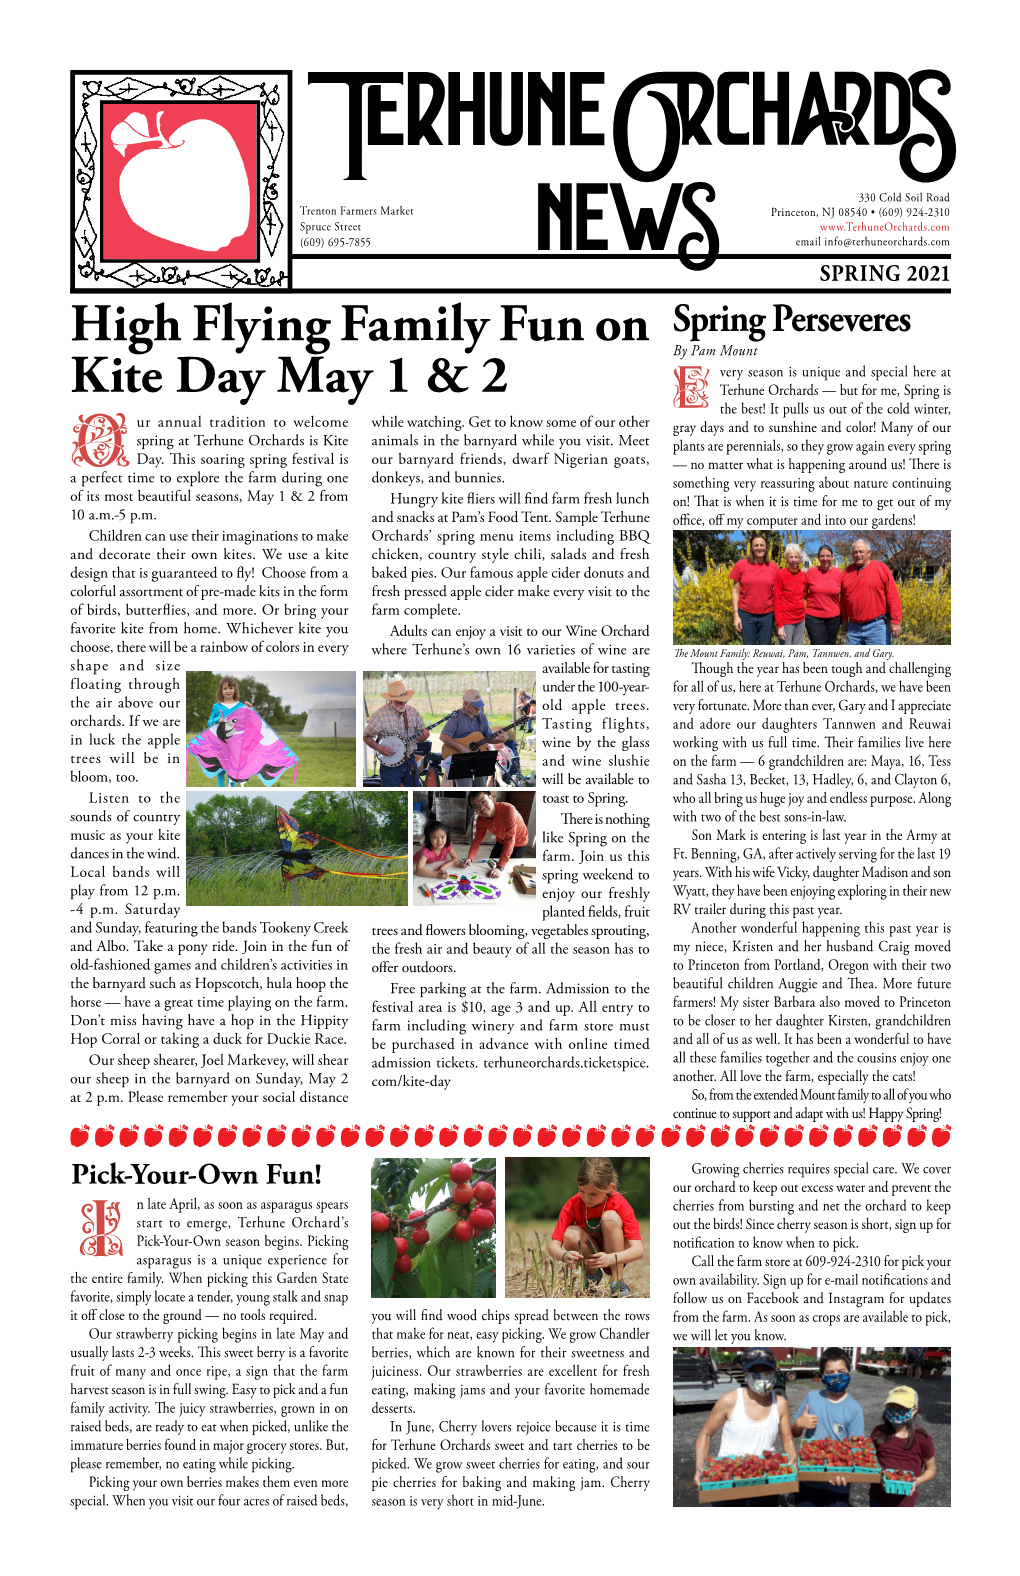 High Flying Family Fun on Kite Day May 1 & 2